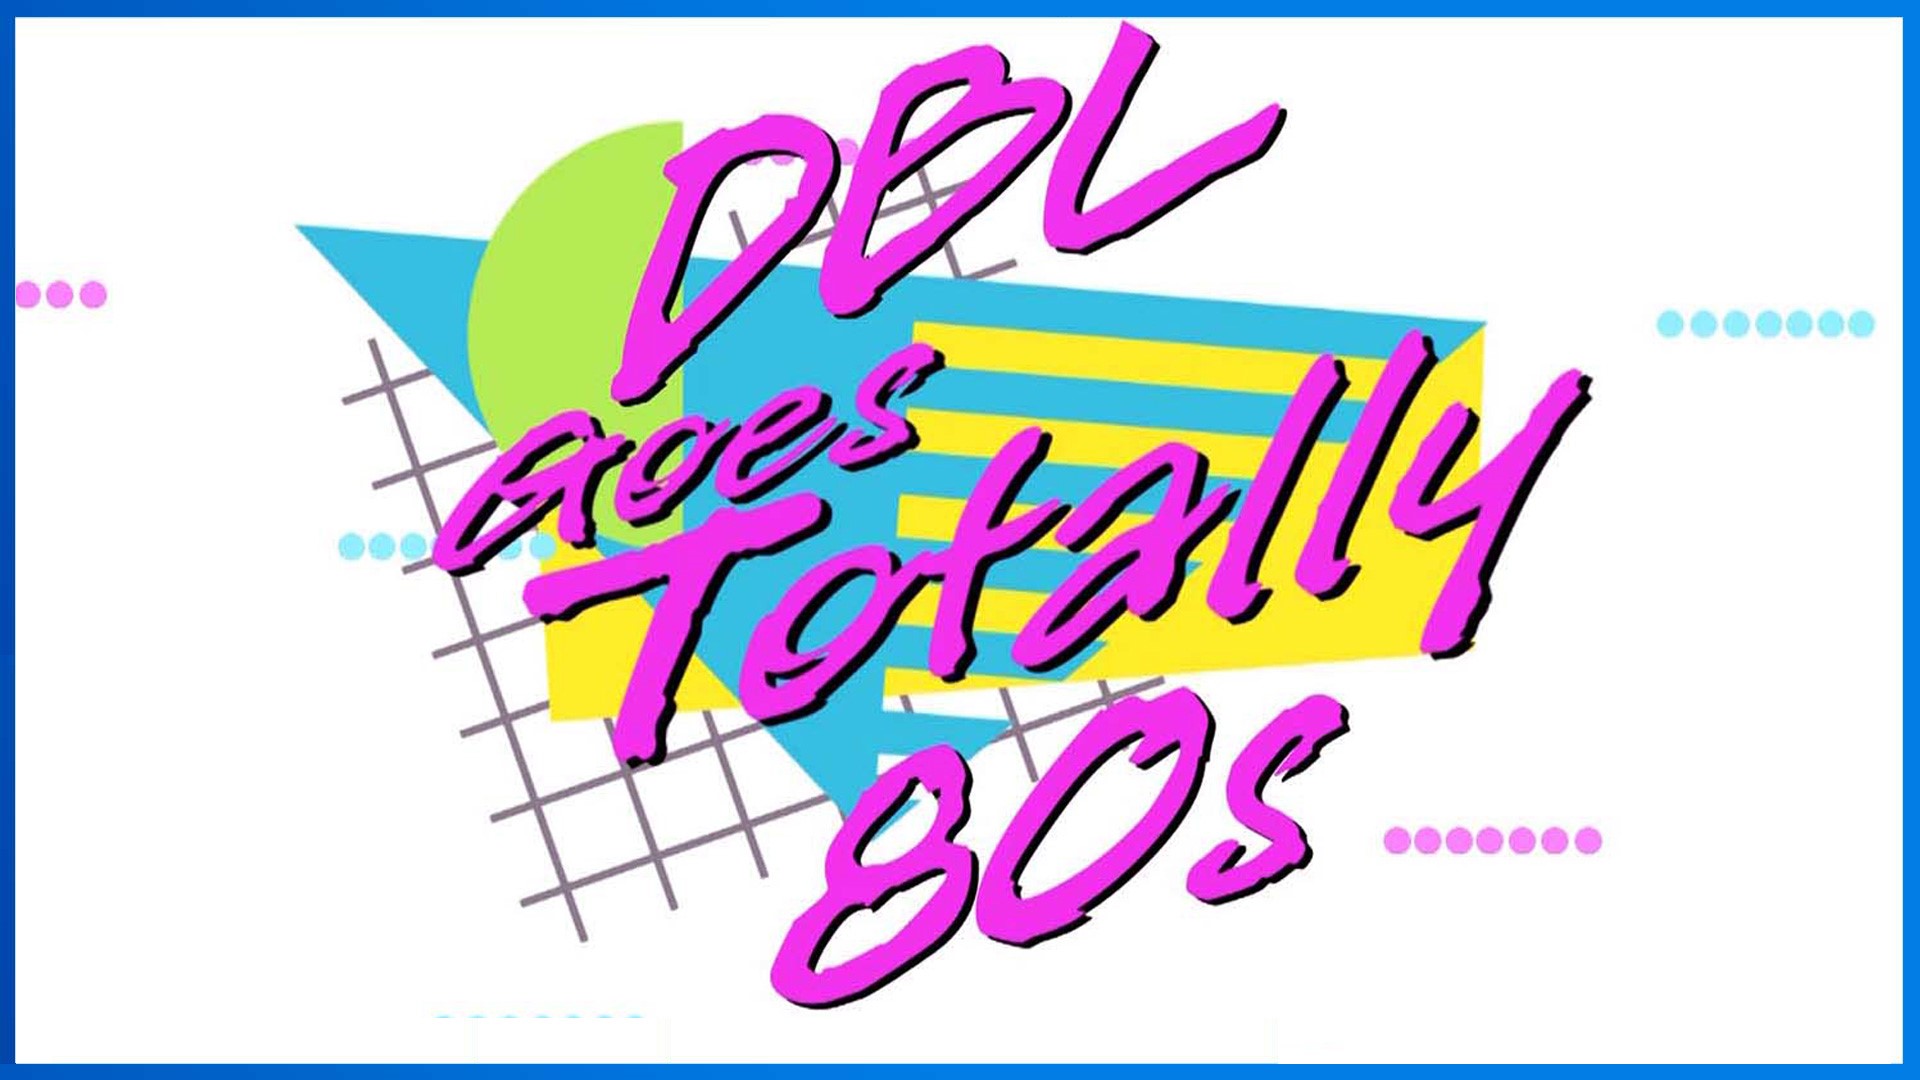 DBL Goes Totally 80s With An Entire Show Dedicated to the Music, Fashion & Culture That Defined the Decade